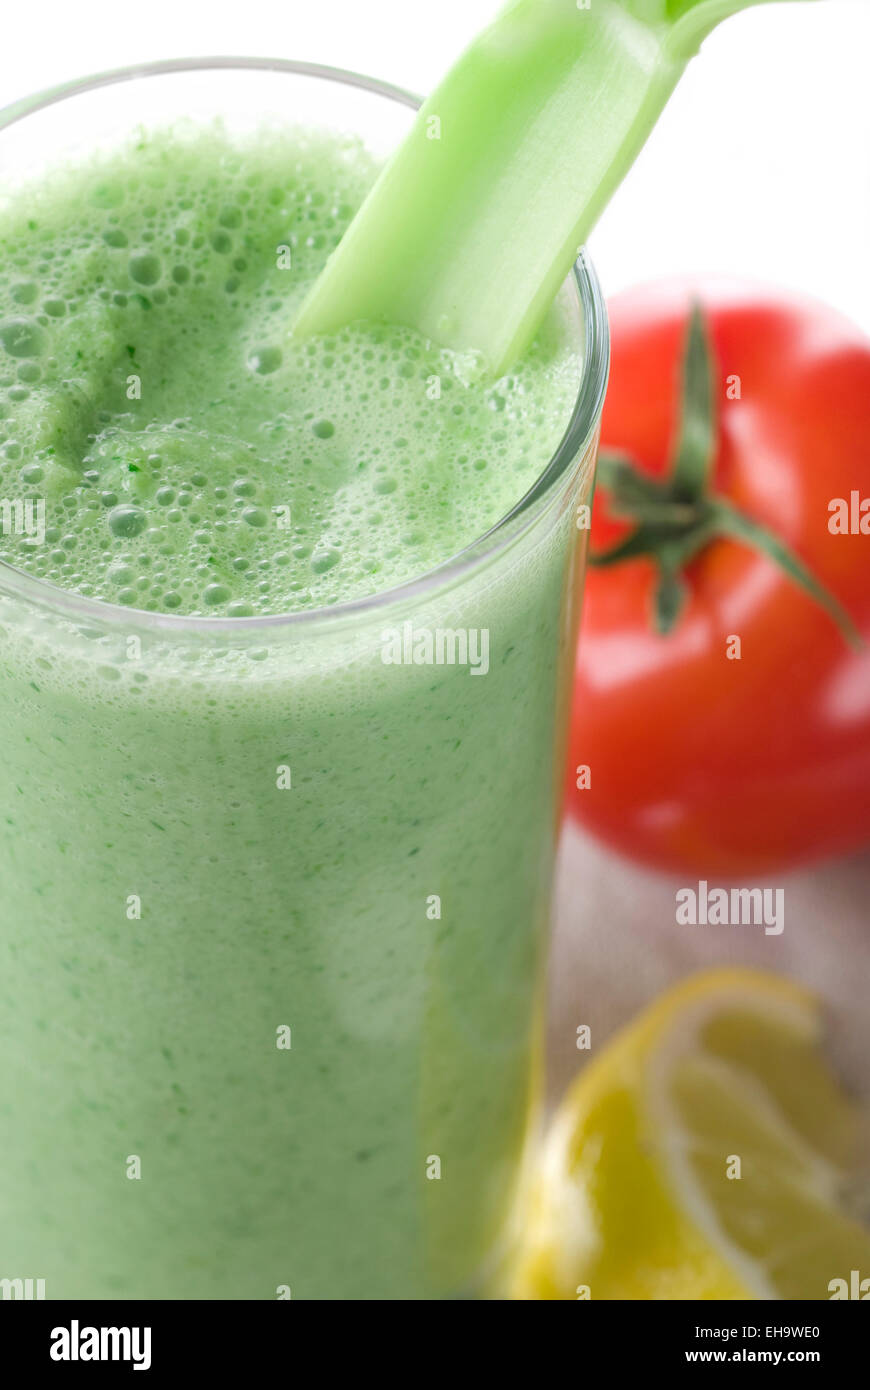 Fresh green smoothie, made from green vegetables. Stock Photo